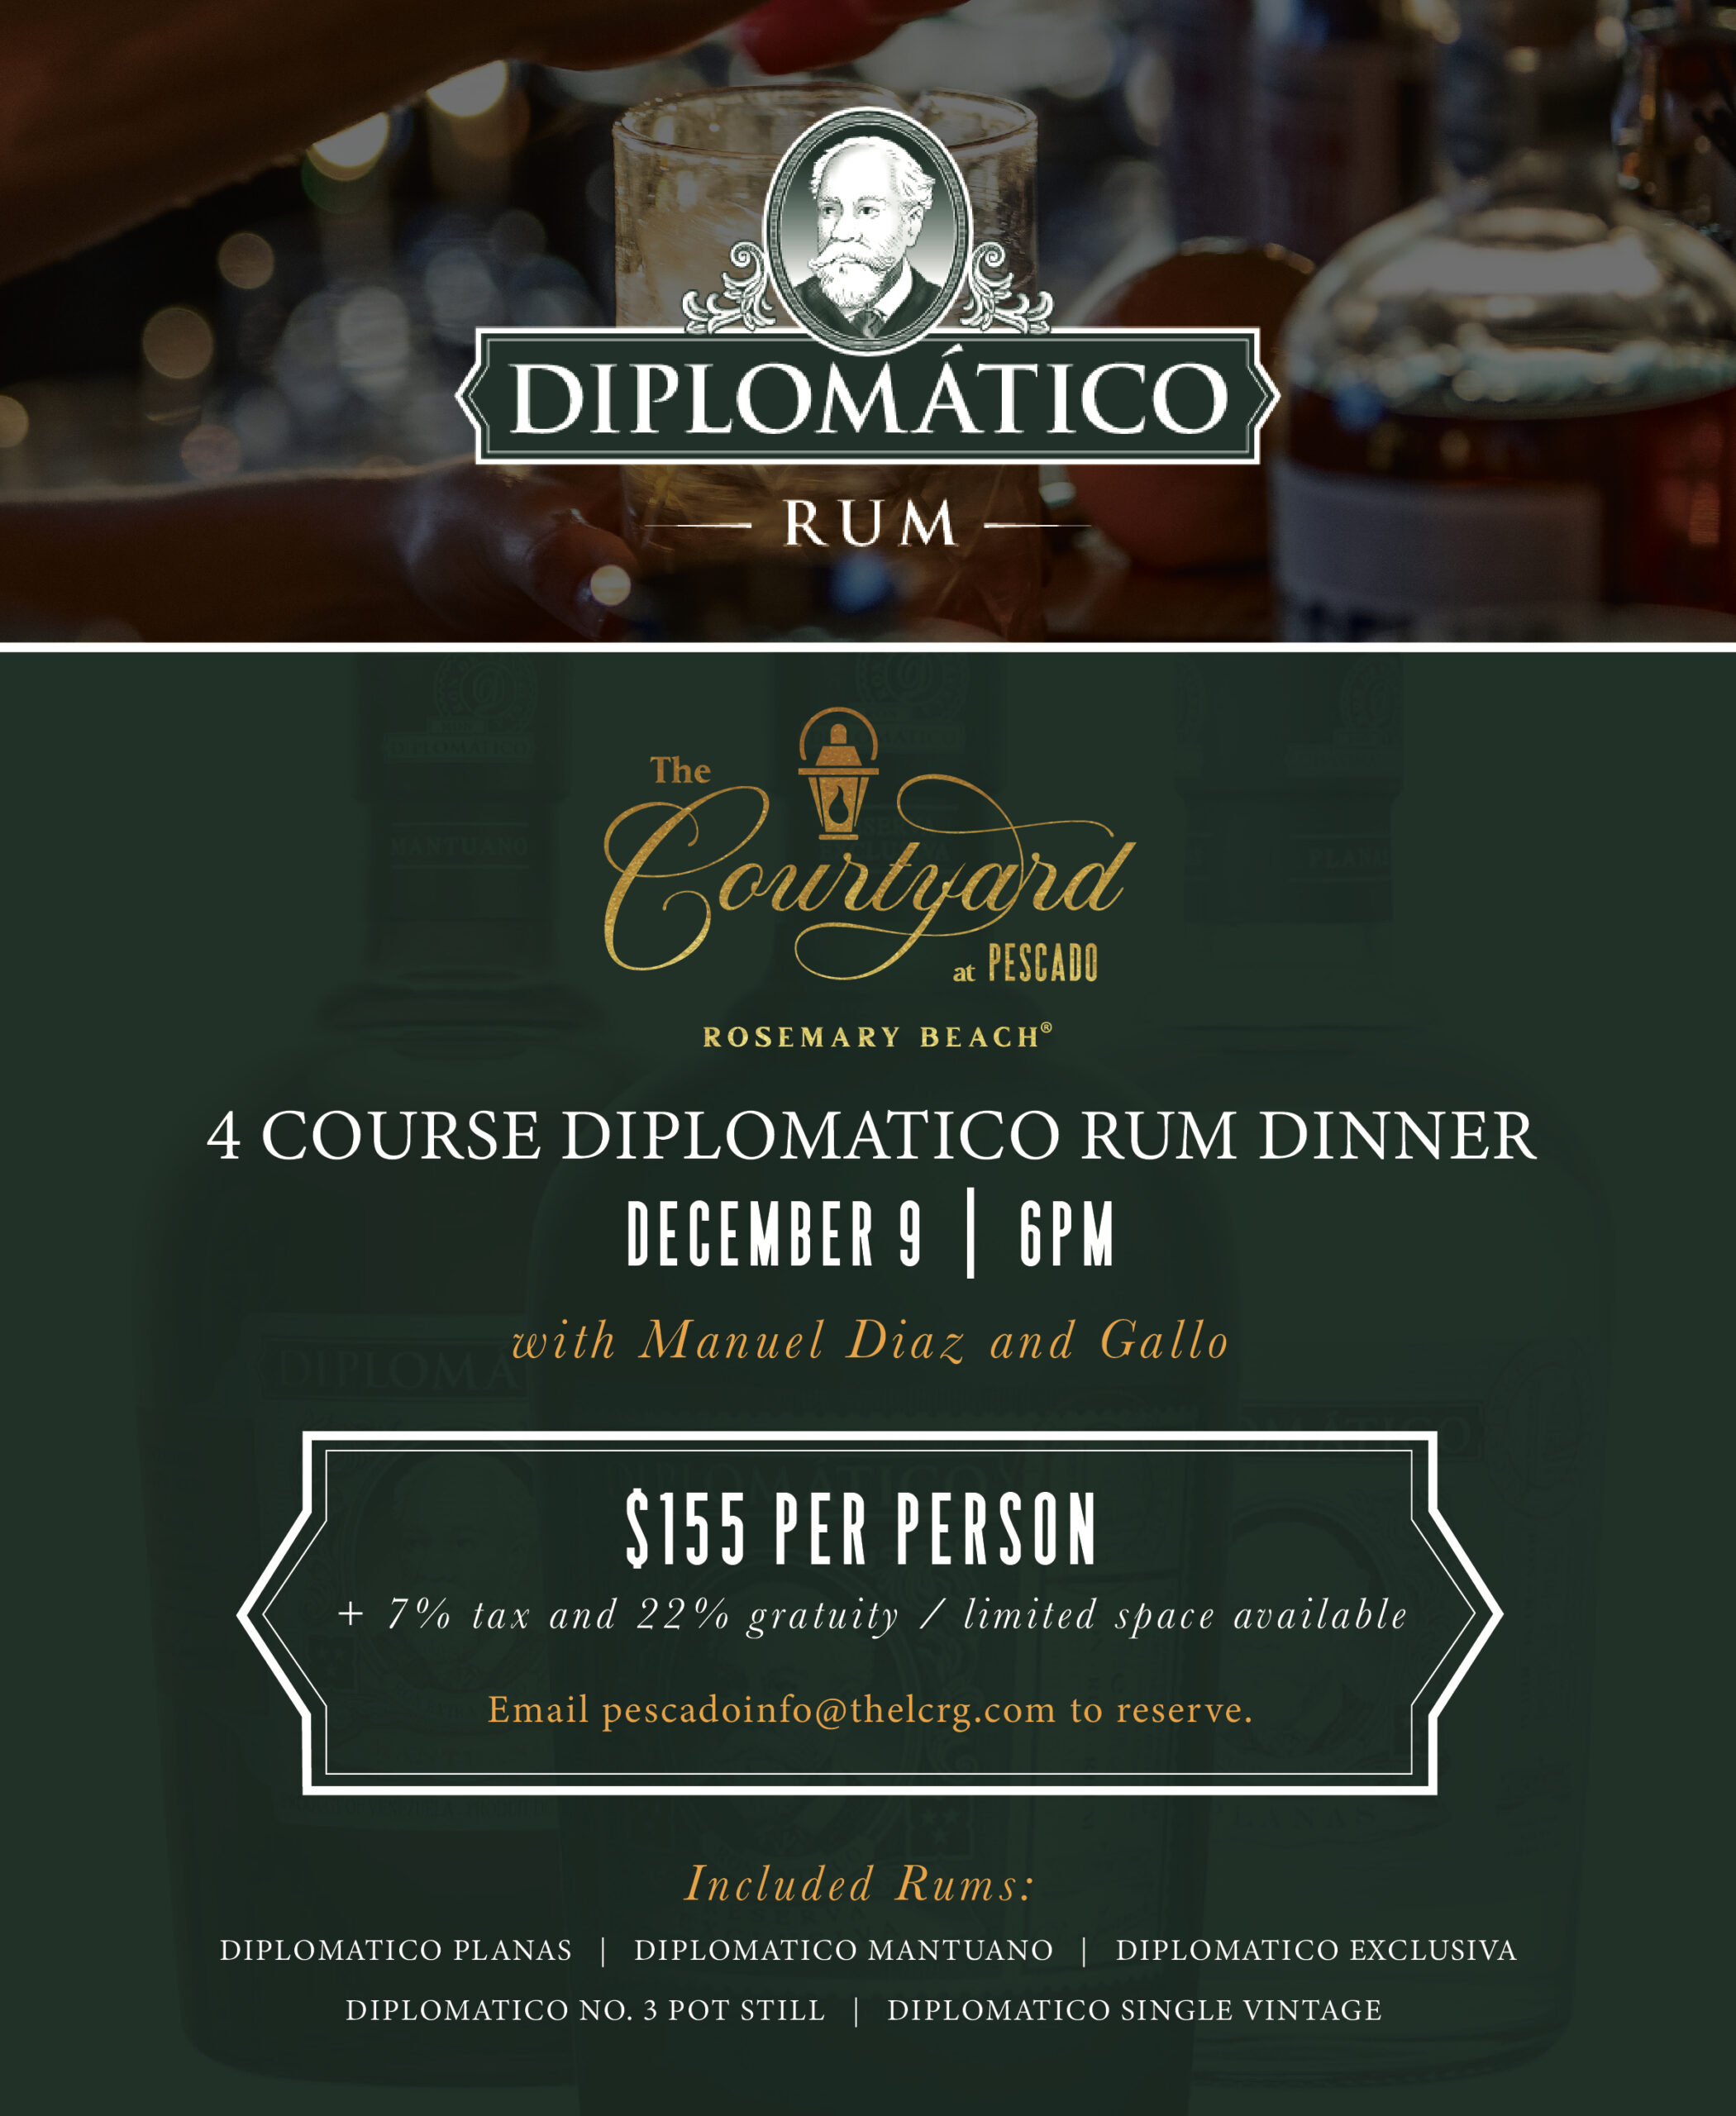 The Courtyard at Pescado to Host a Four Course Diplomatico Rum Dinner